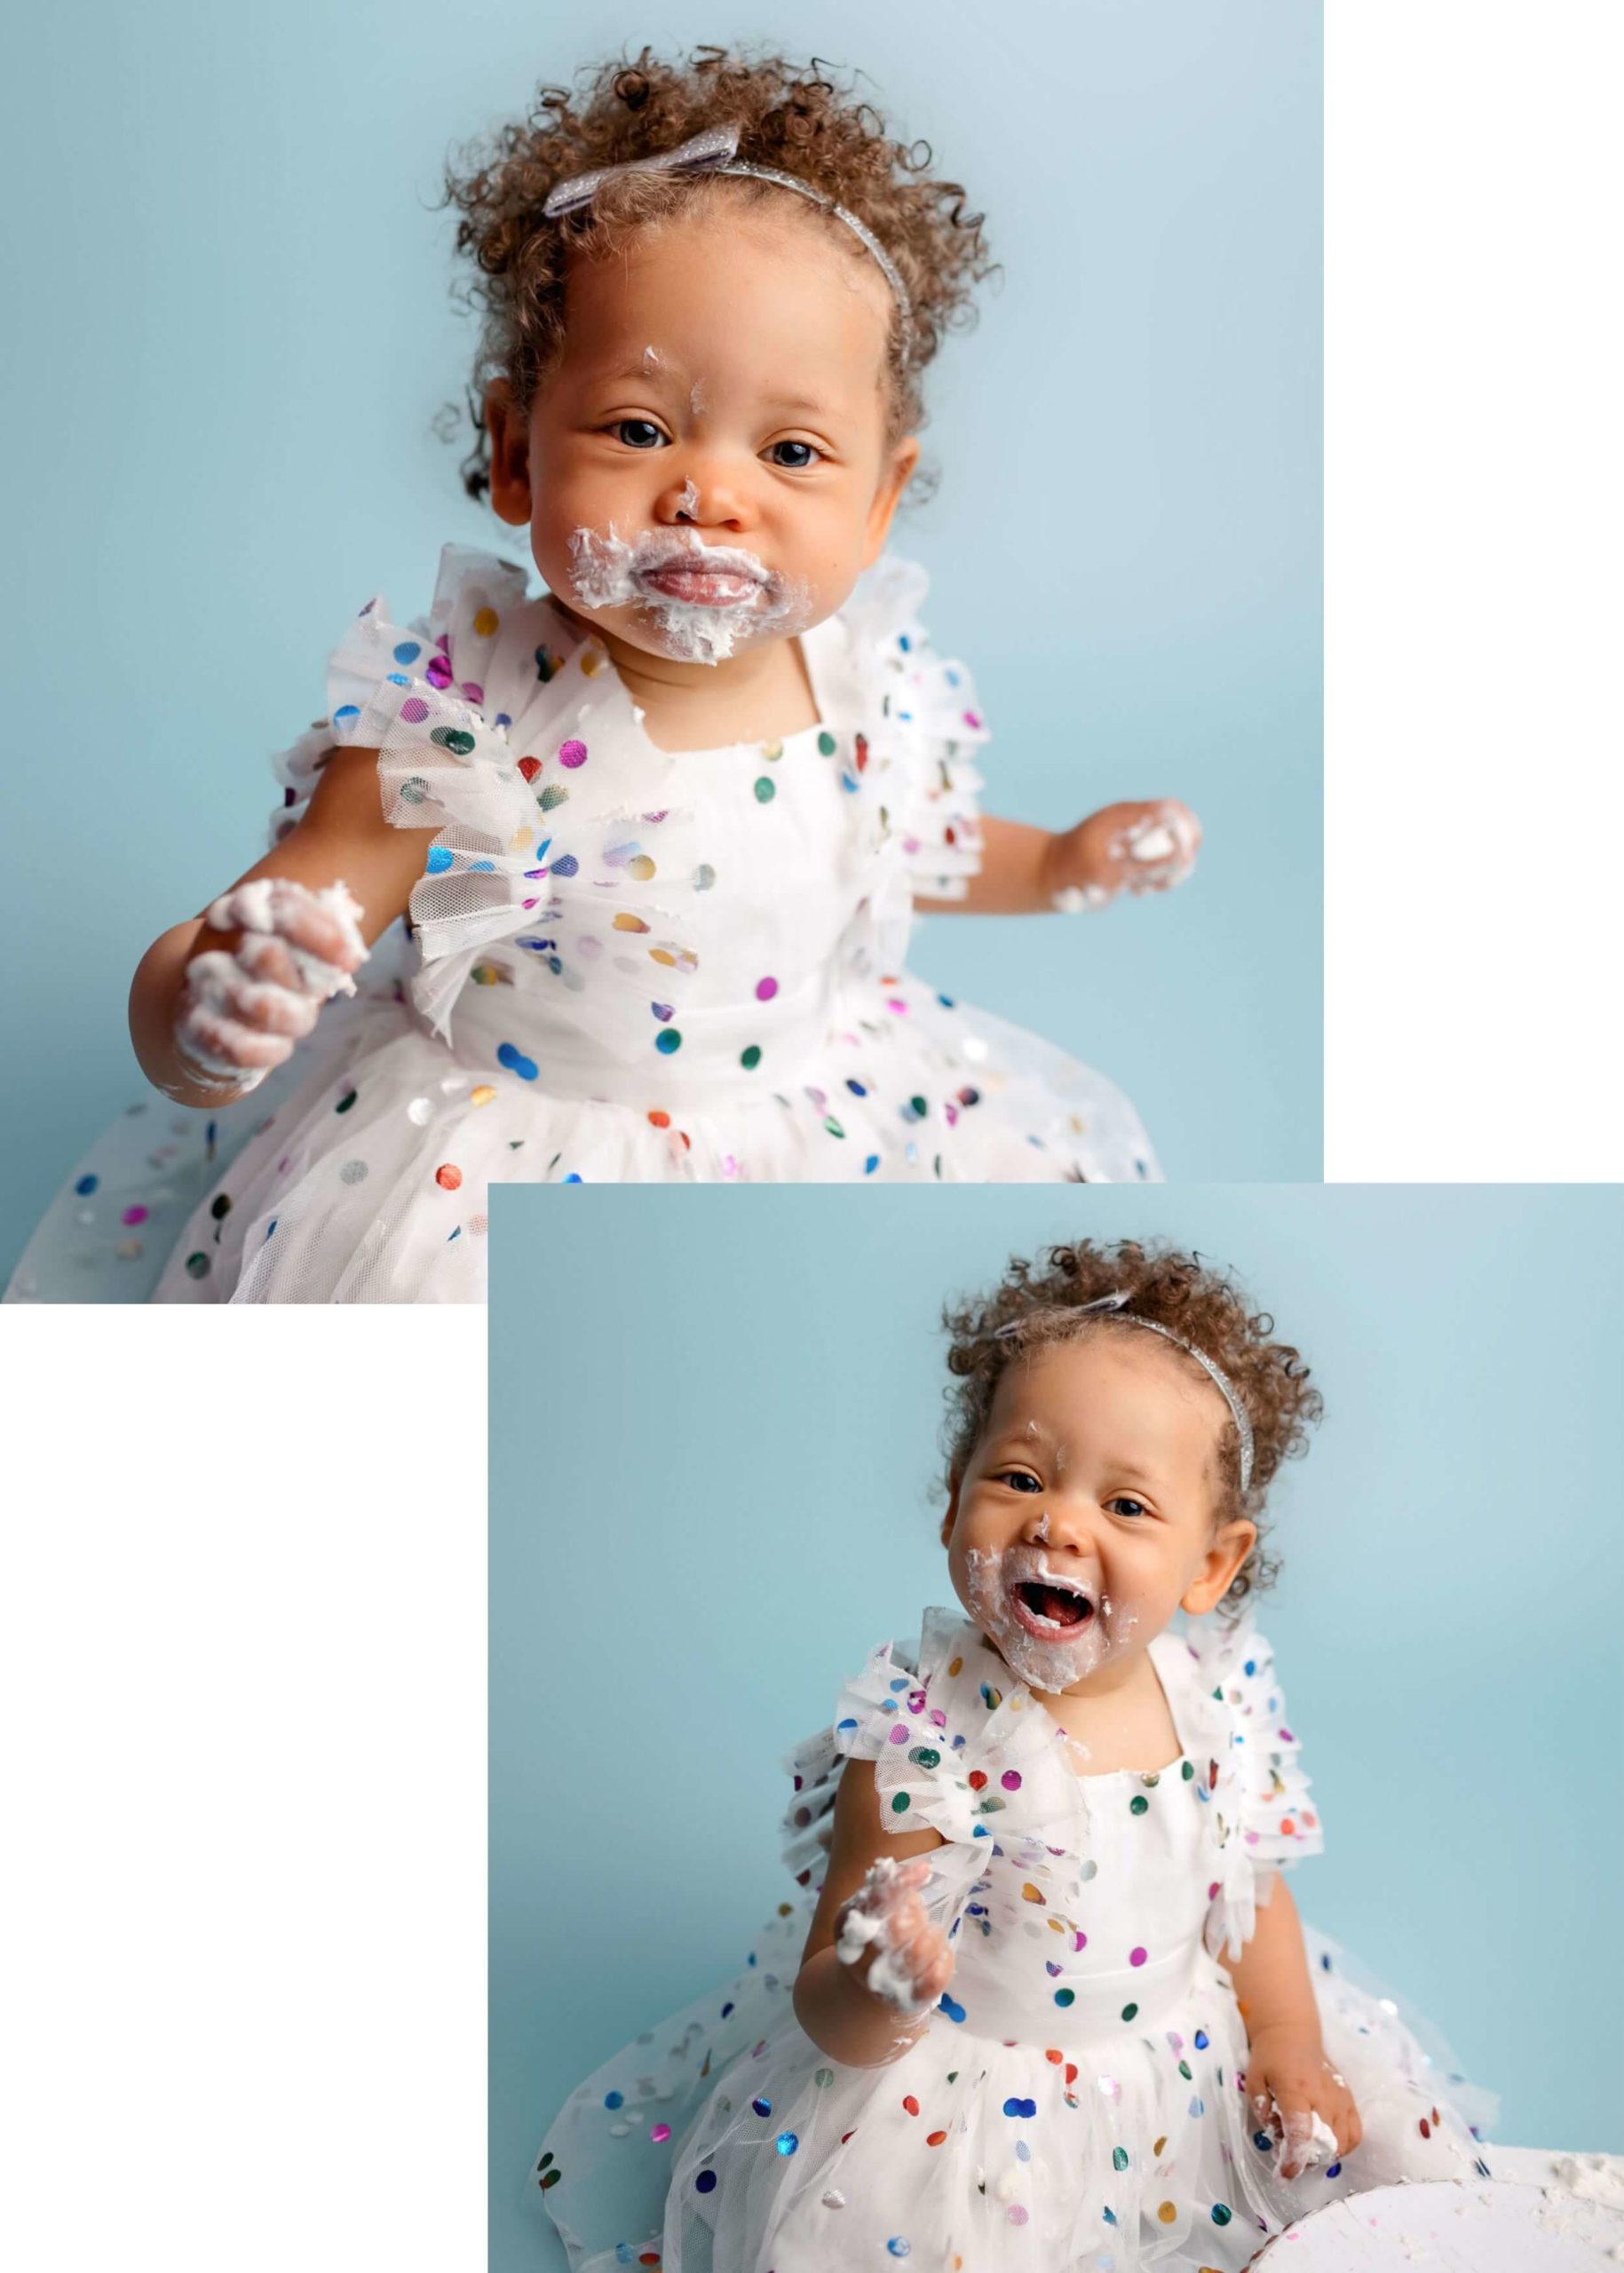 Happy baby girl wearing a white dress with dots of colors on it while enjoying her cake for her La Mesa Studio Cake Smash Pictures. She's got cake and frosting all over her face and hands and laughing big.